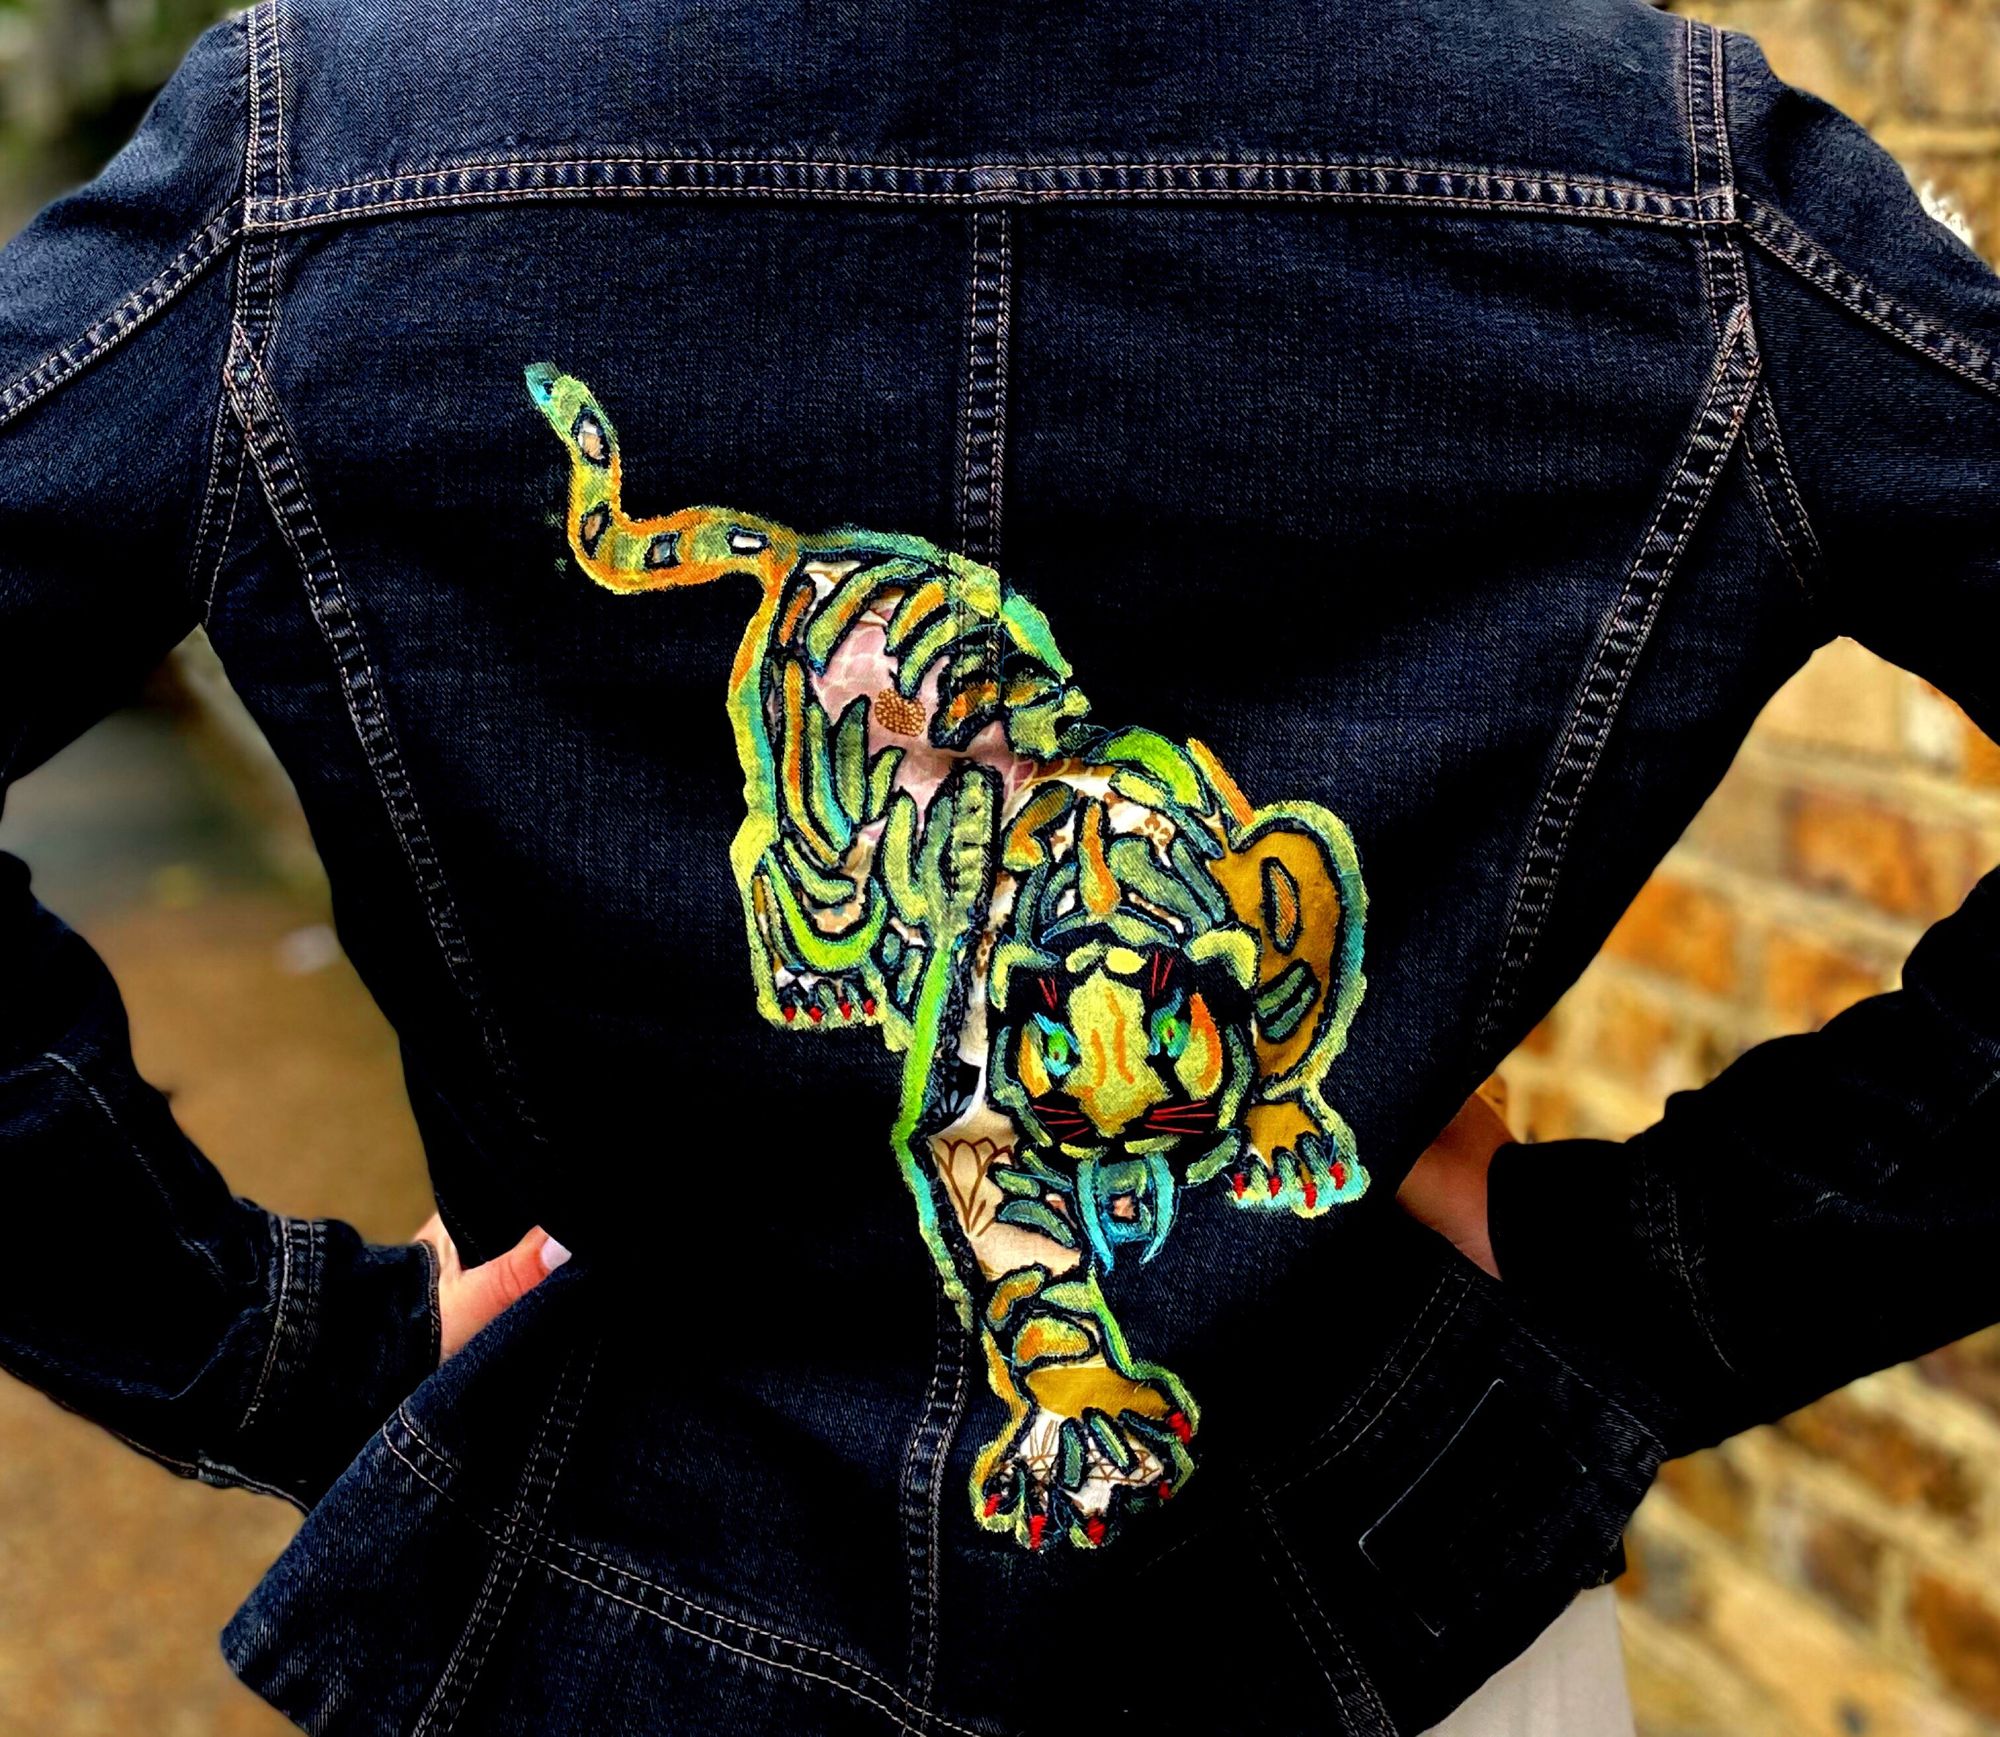 Juiced: Jazzing Up Old Denim With Vibrant Art